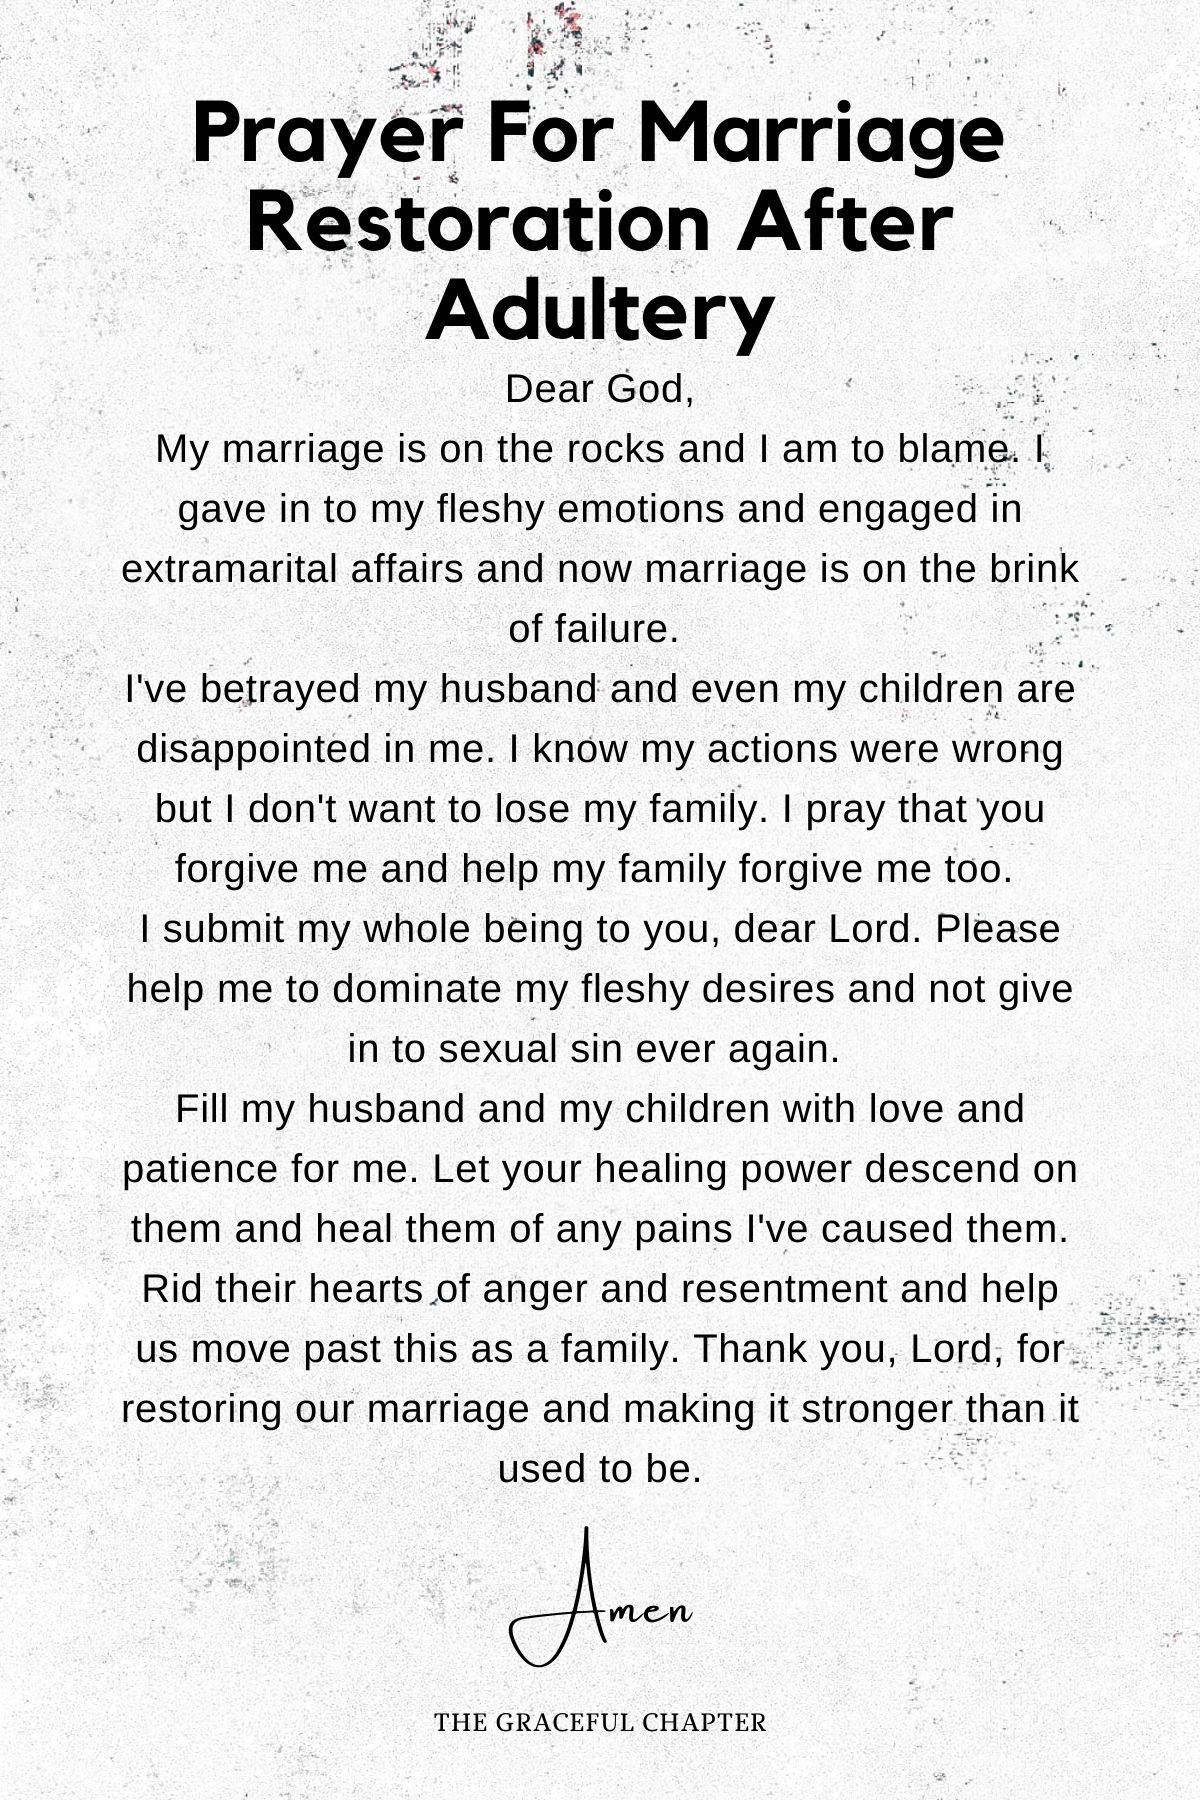 Prayer for marriage restoration after adultery